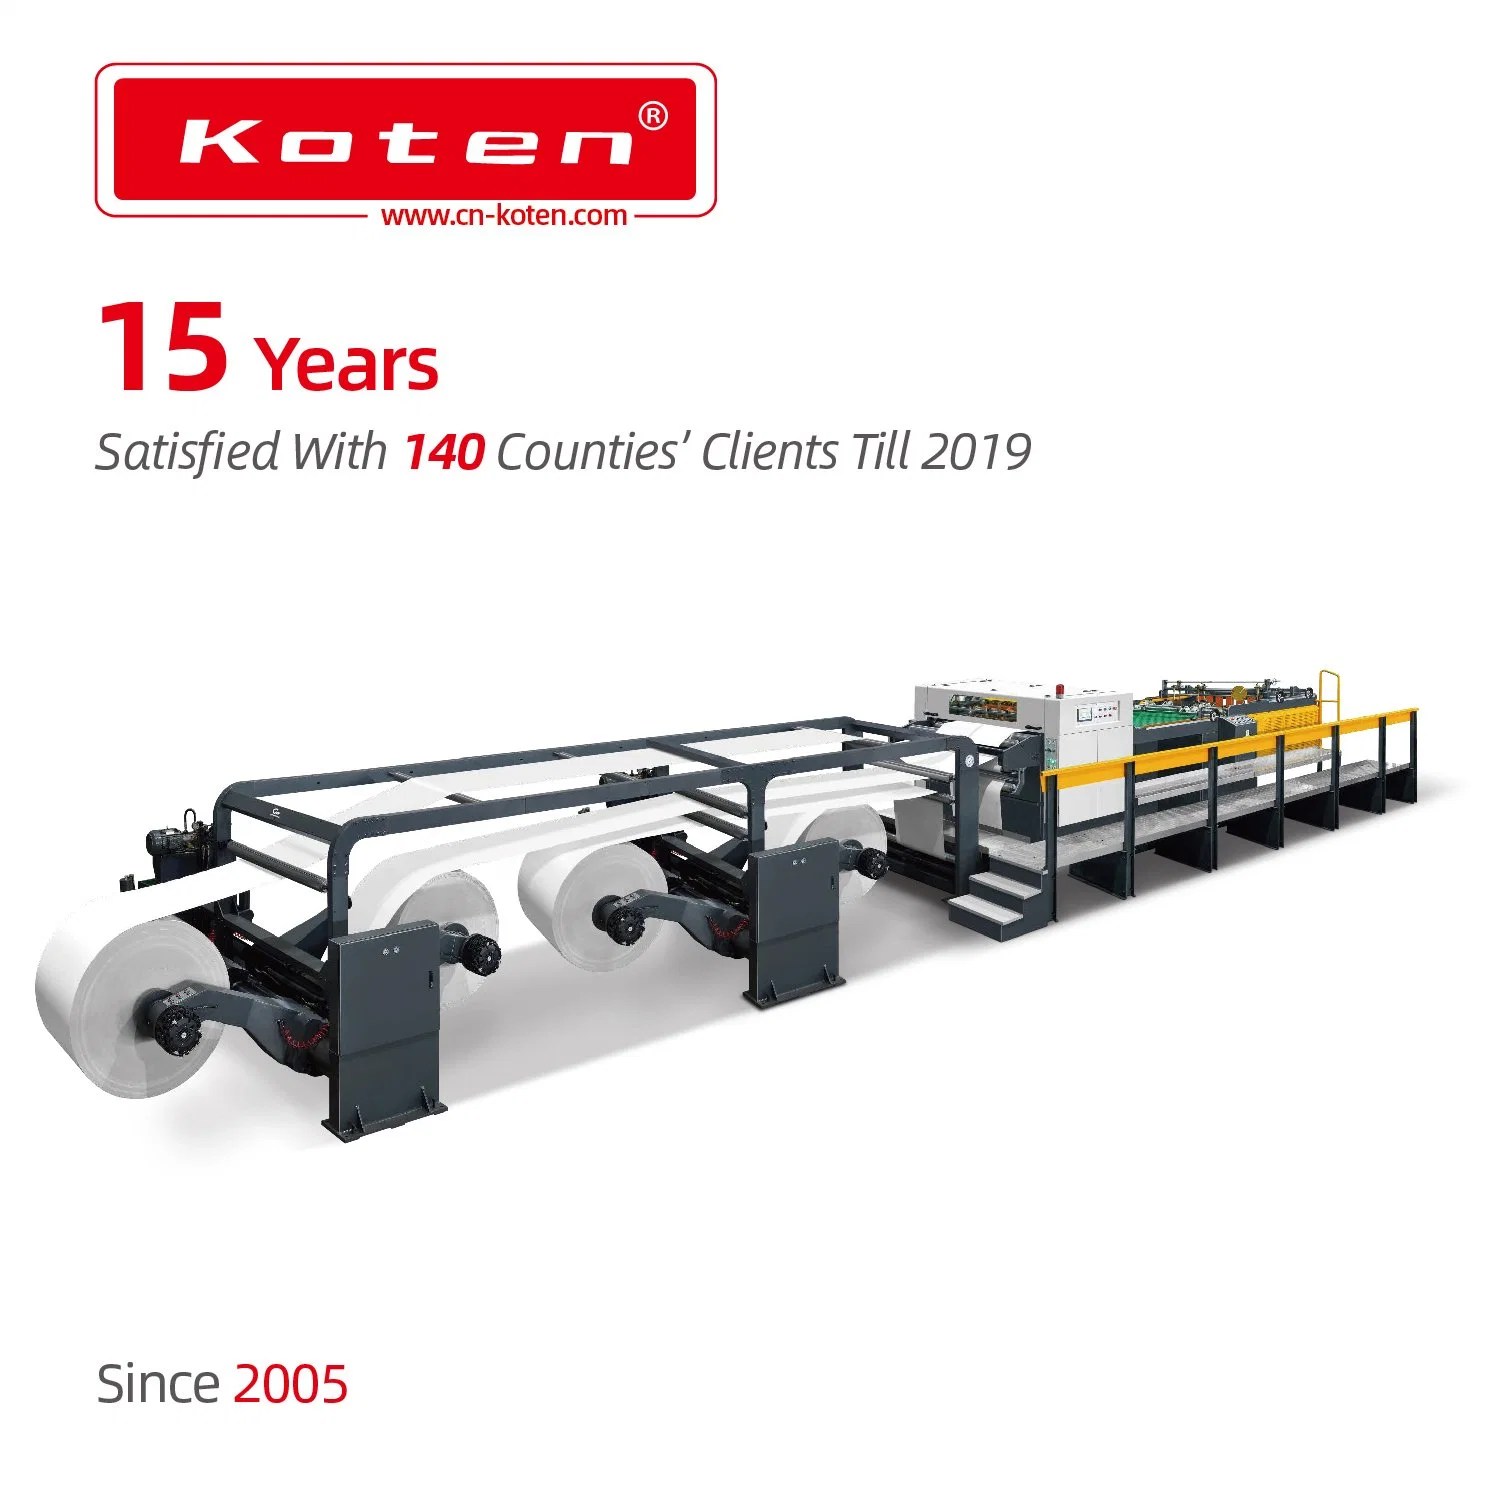 Single-Blade Cutter Steel Koten by Strong Wooden Cases. Cross Cutting Paper Sheeting Machine